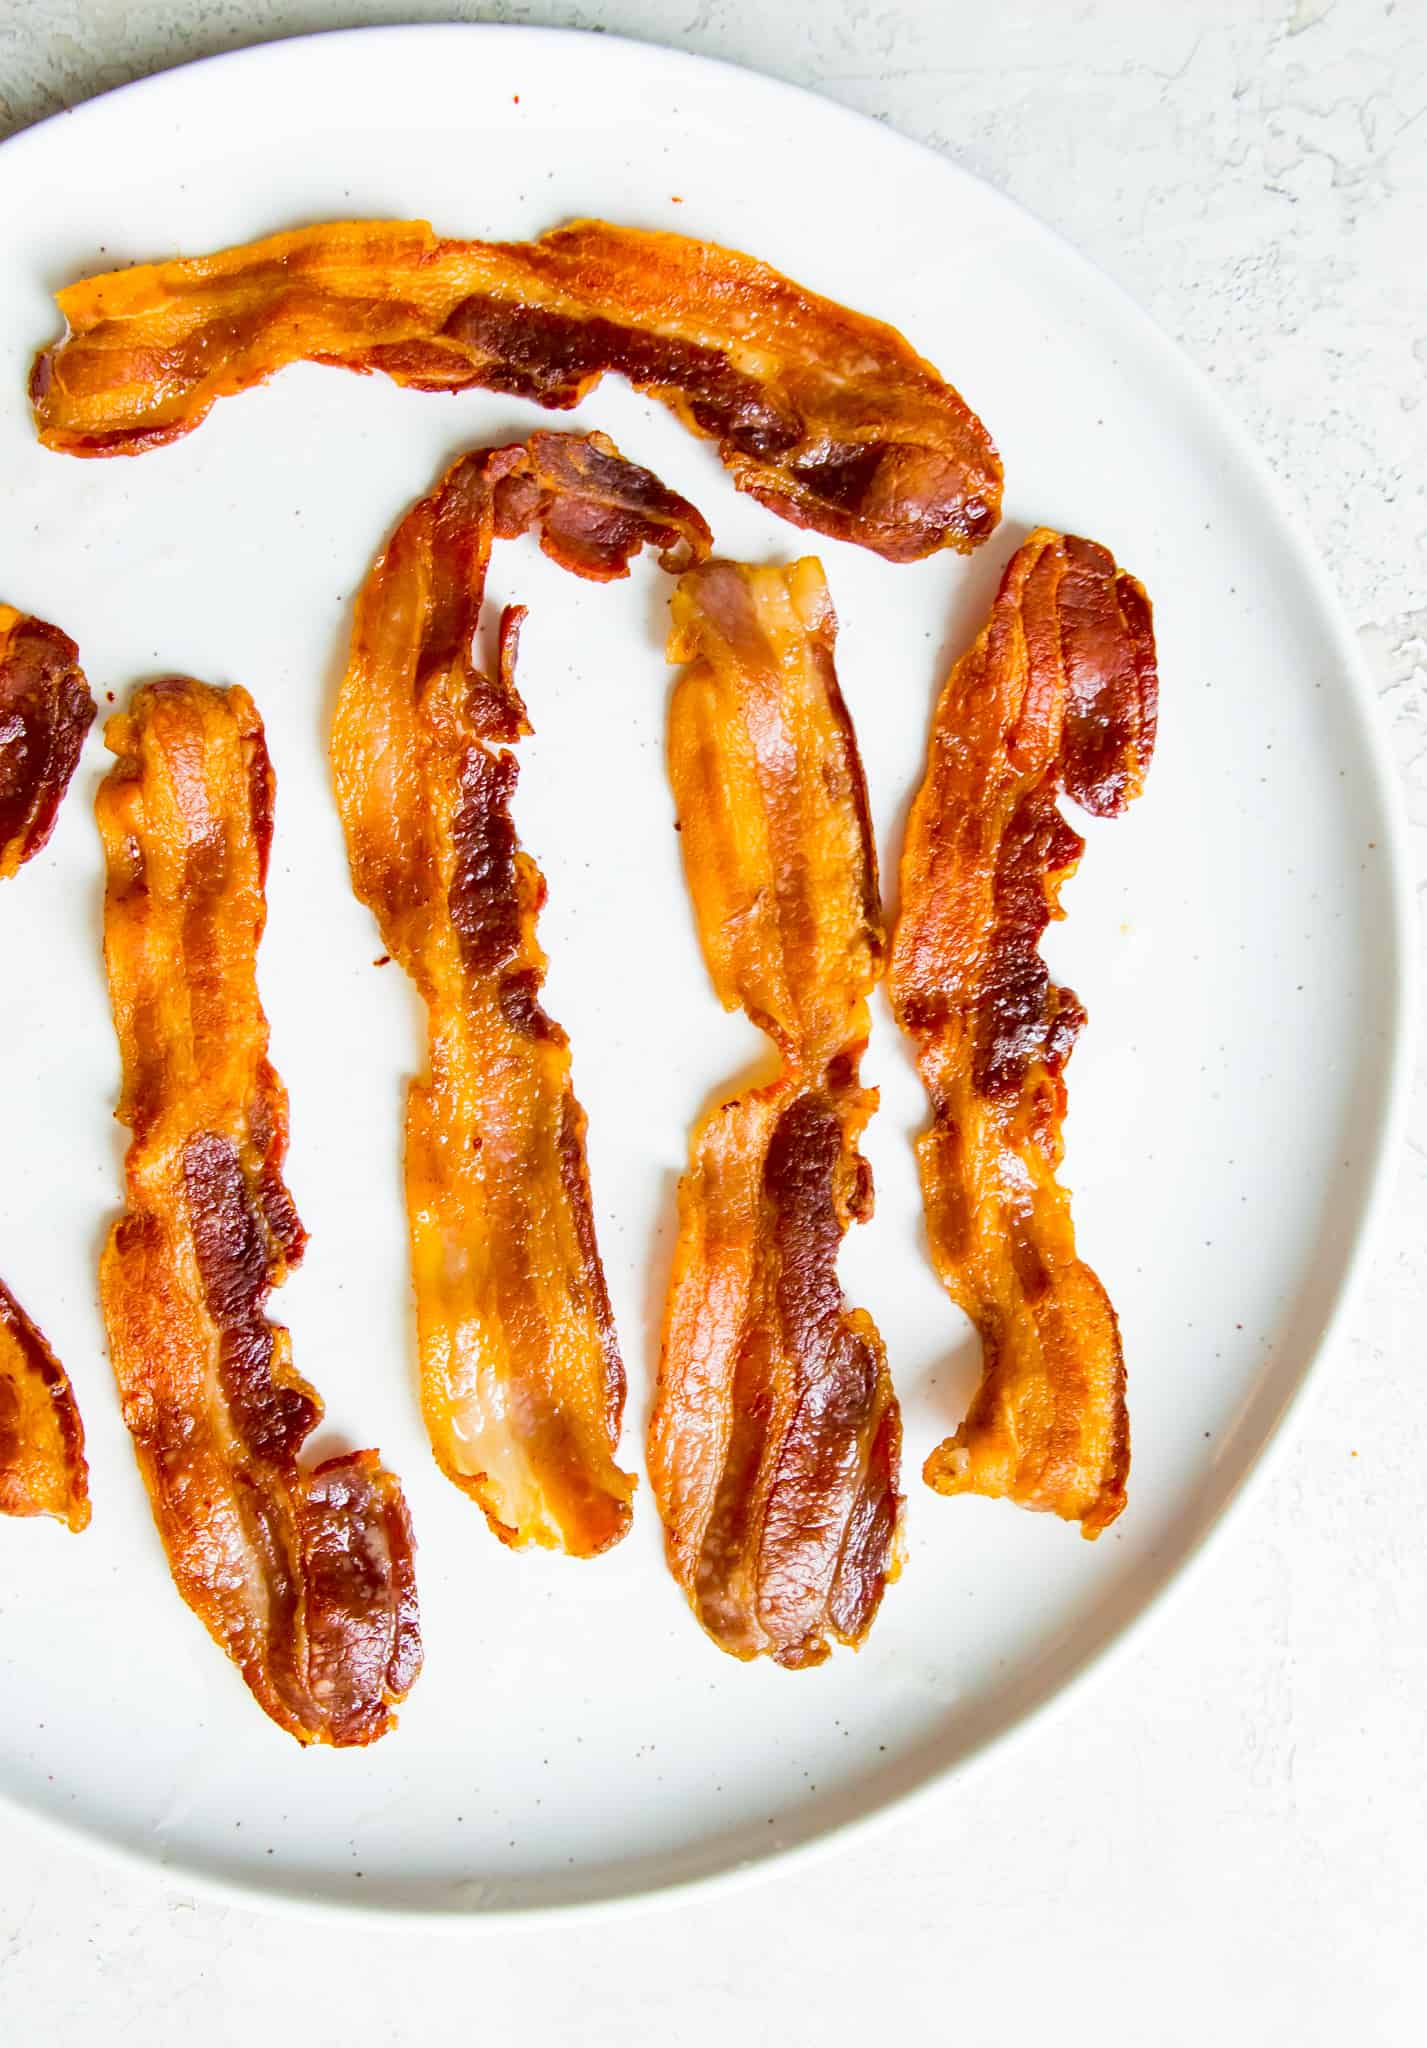 Strips of cooked bacon on a plate.